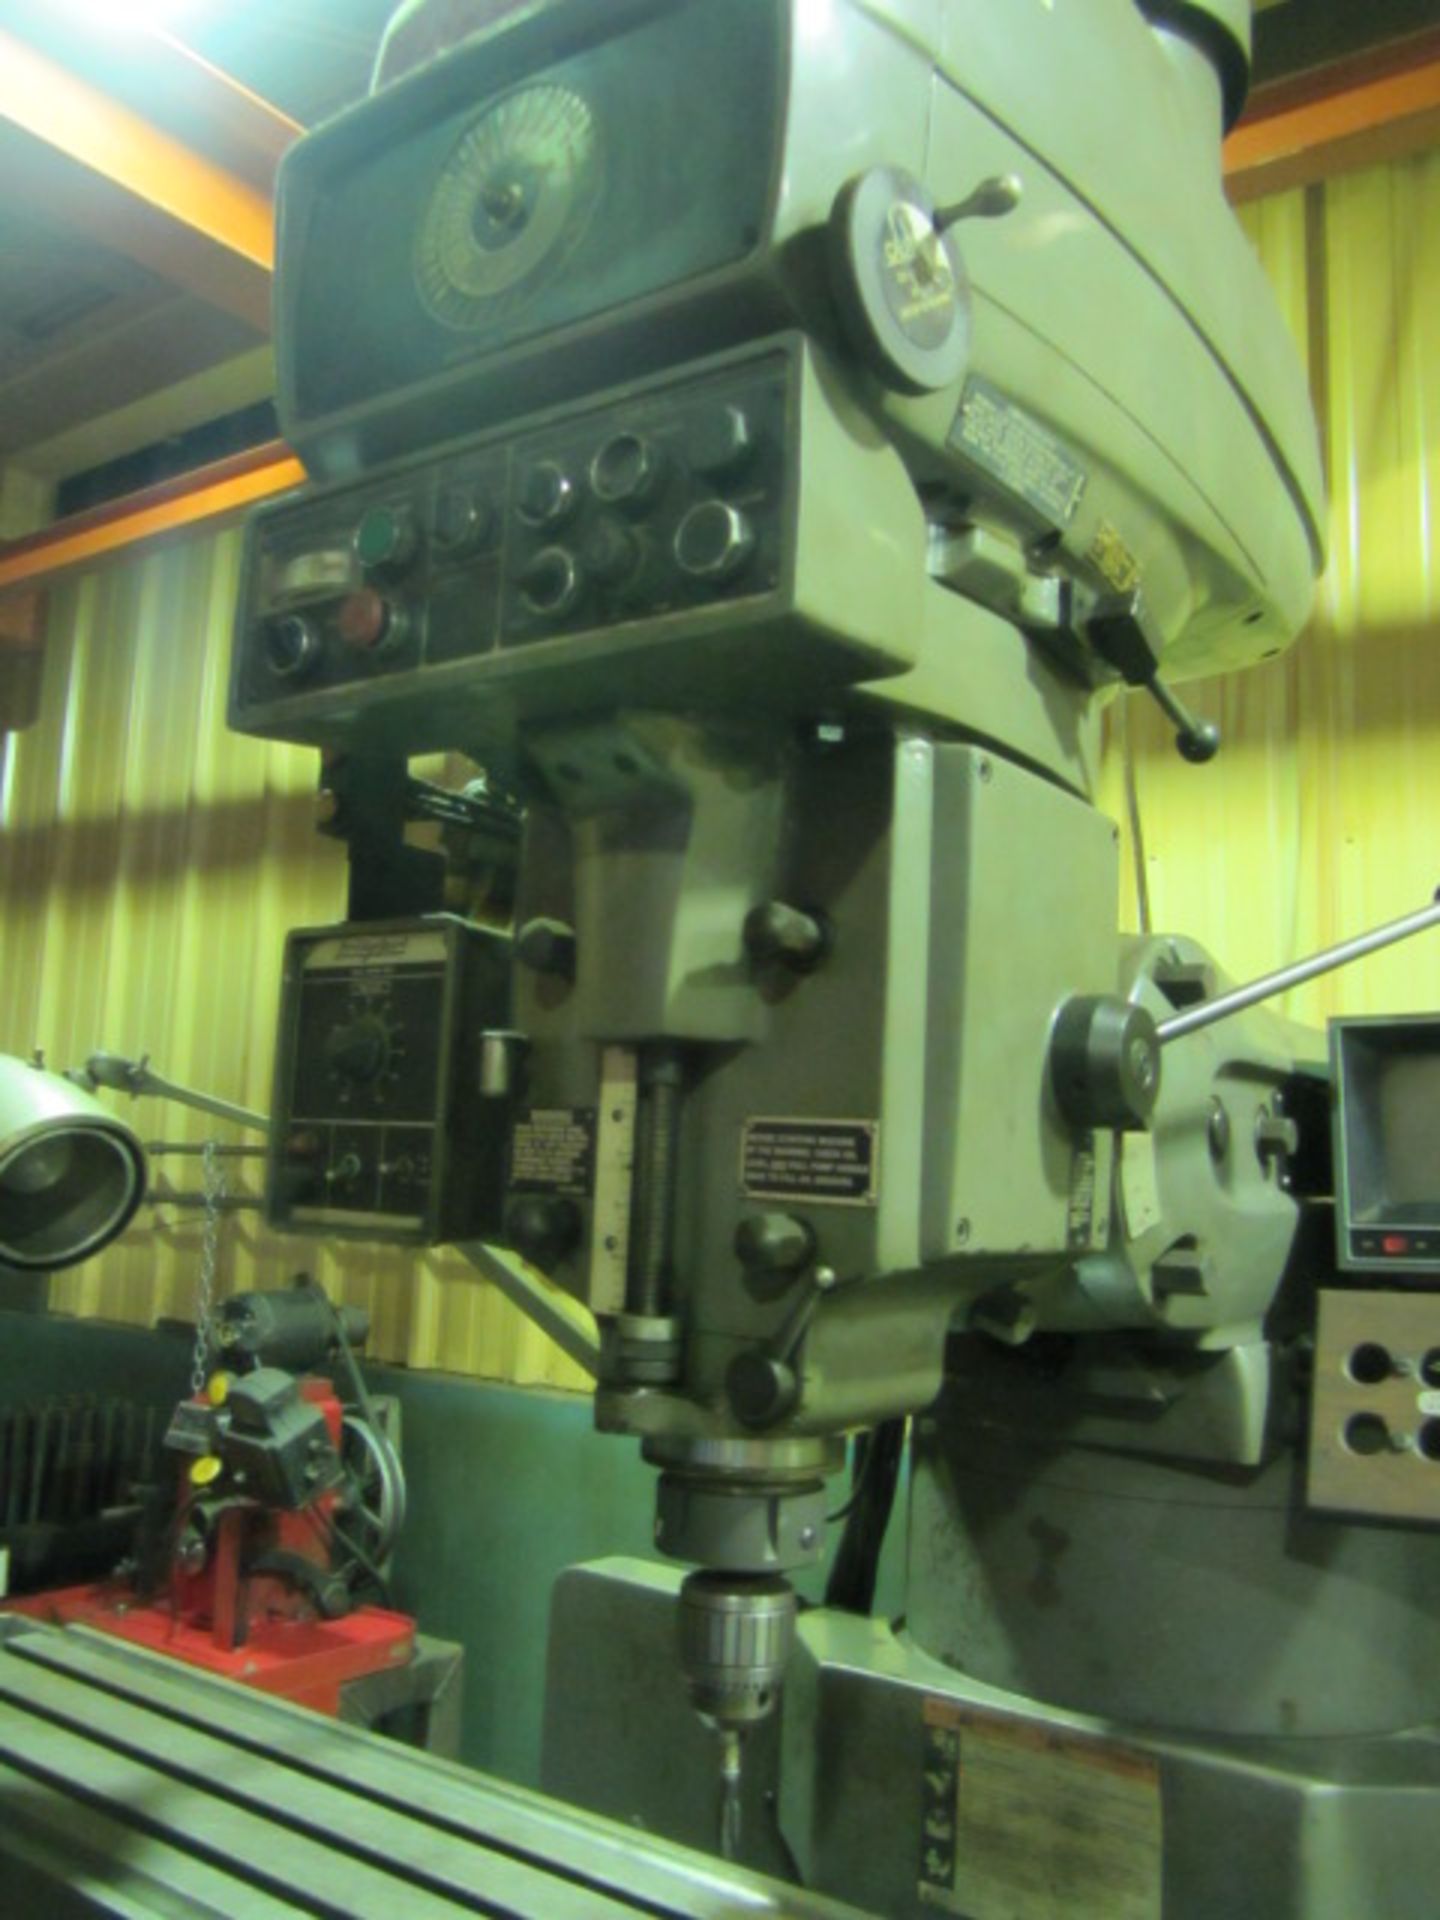 Bridgeport Series II Special Vertical Milling Machine with 11'' x 58'' Power Feed Table, R-8 Spindle - Image 5 of 6